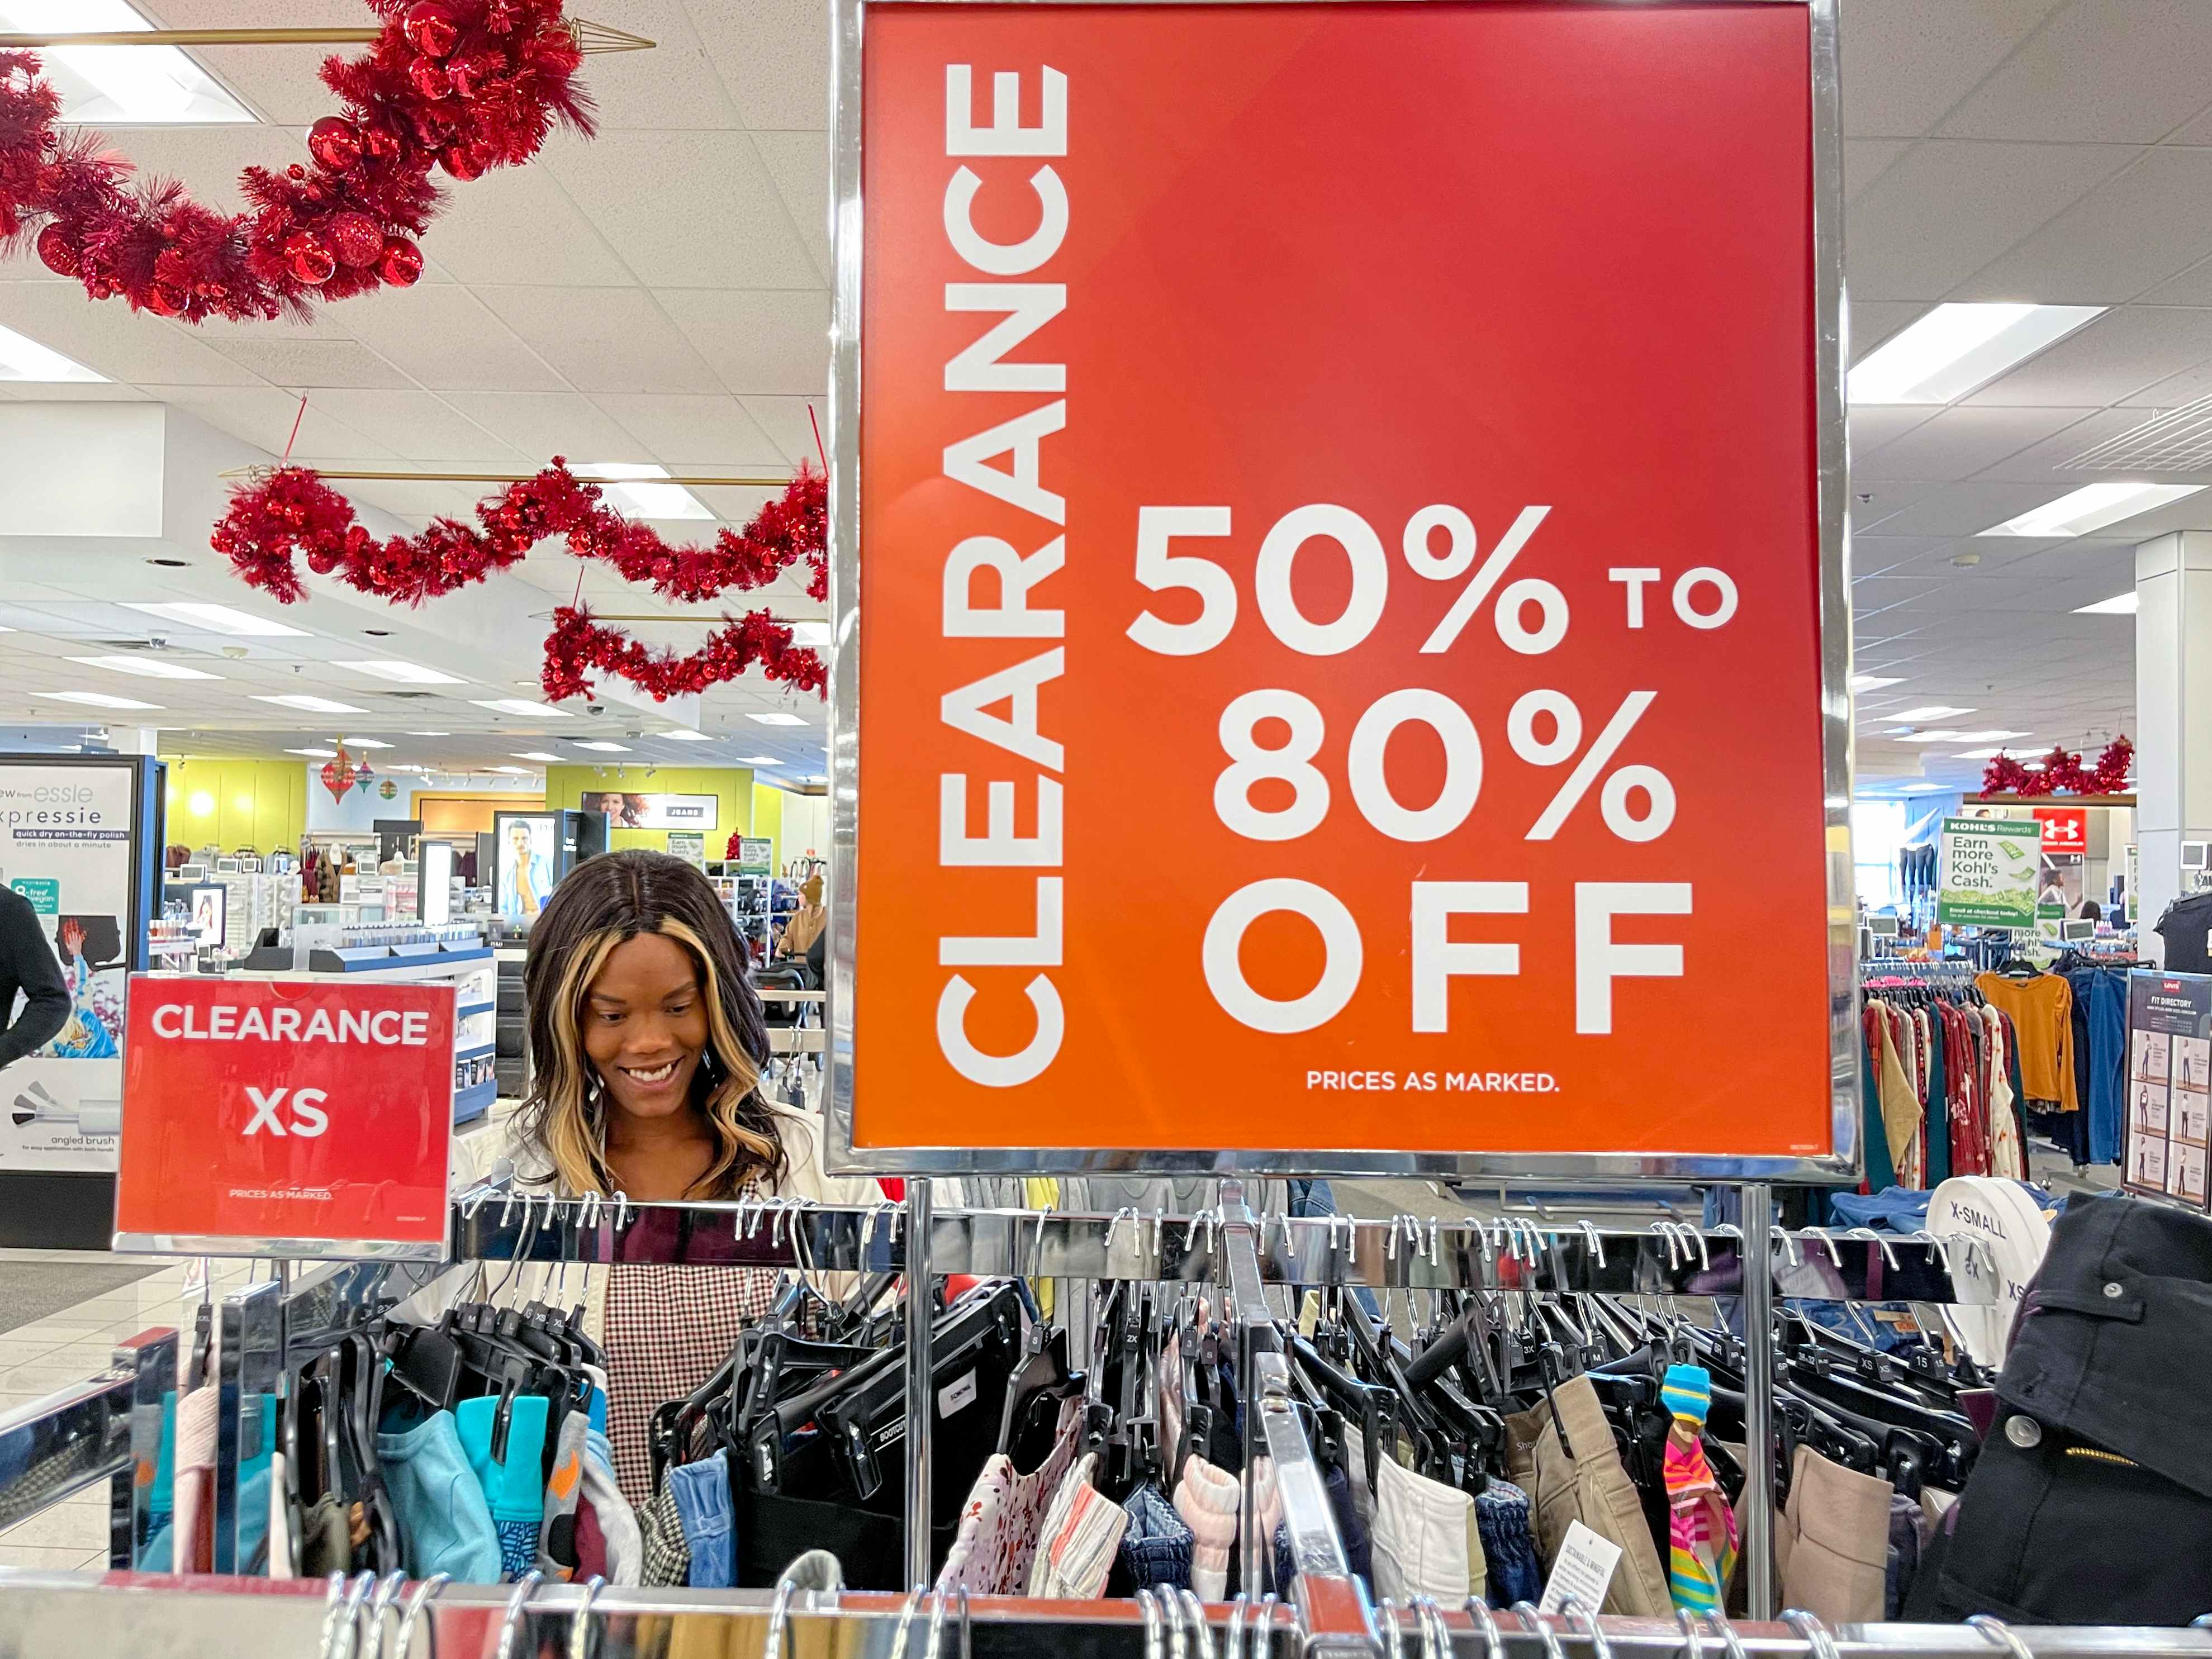 Kohl's: EXTRA 20% Off Women's Apparel Clearance In Store Only (No